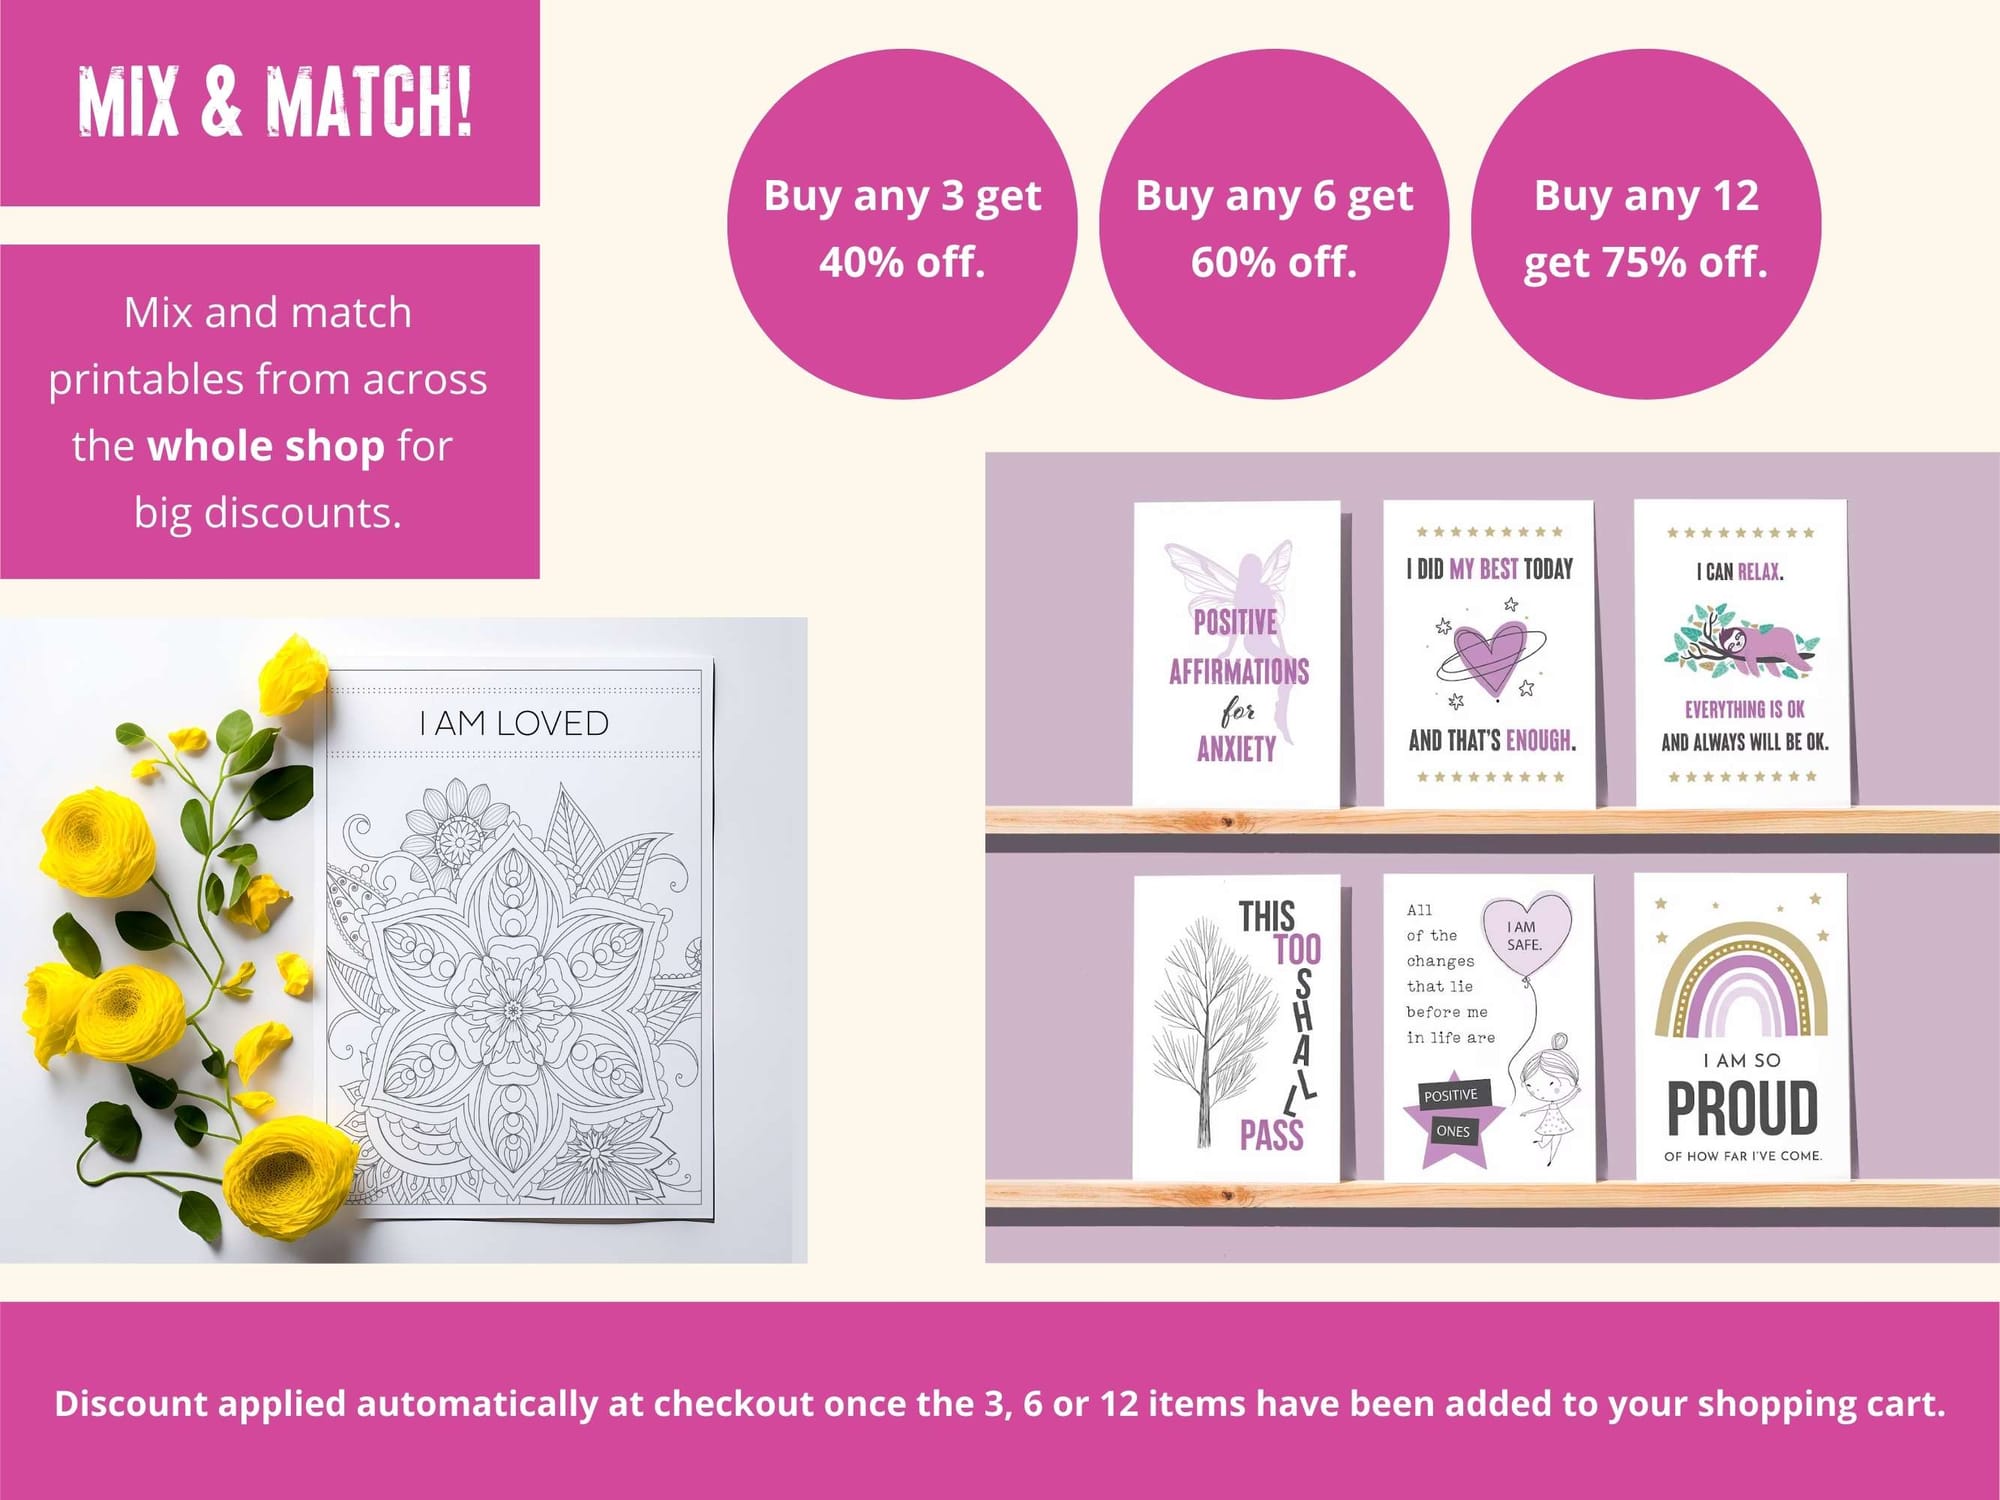 Mix and match printables from across the whole shop for big discounts. Buy 3 get 40% off. Buy 6 get 60% off. Buy 12 get 75% off.